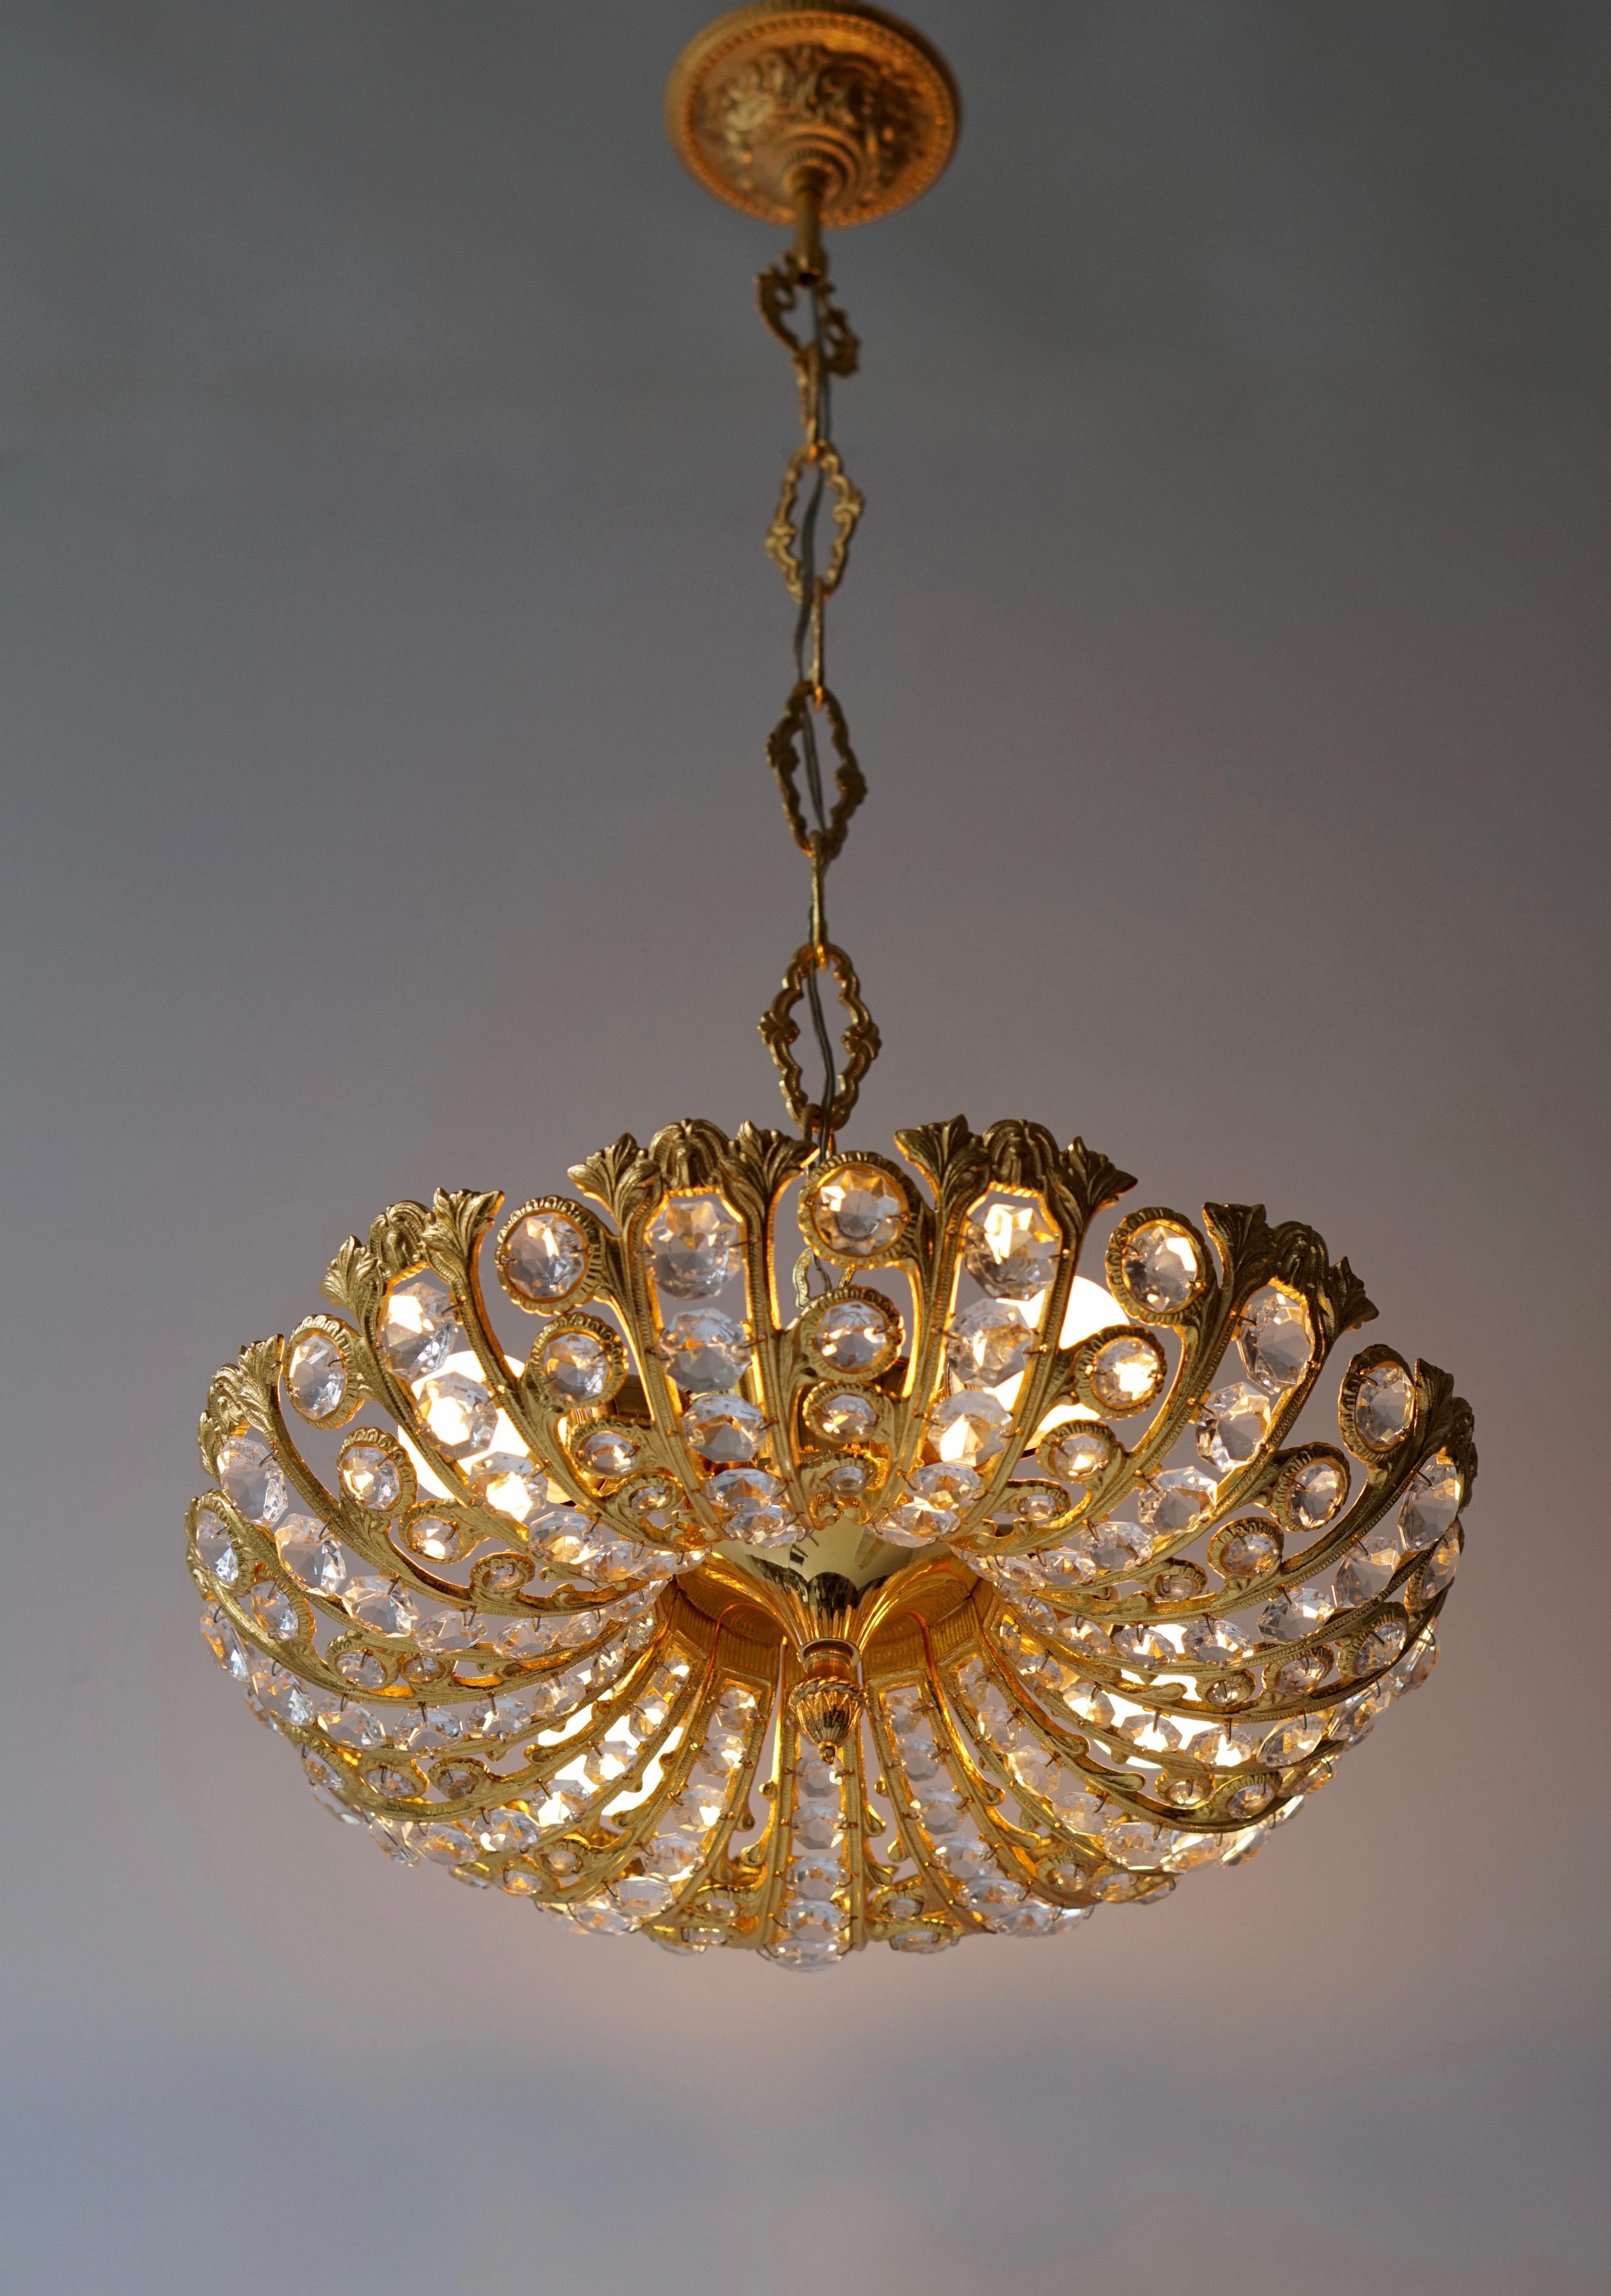 Stunning Mid-Century Modern chandelier with gilded brass frame and cut crystal. 
Measures: Diameter 40 cm. Height fixture 18 cm. 
Total height including the chain 75 cm.